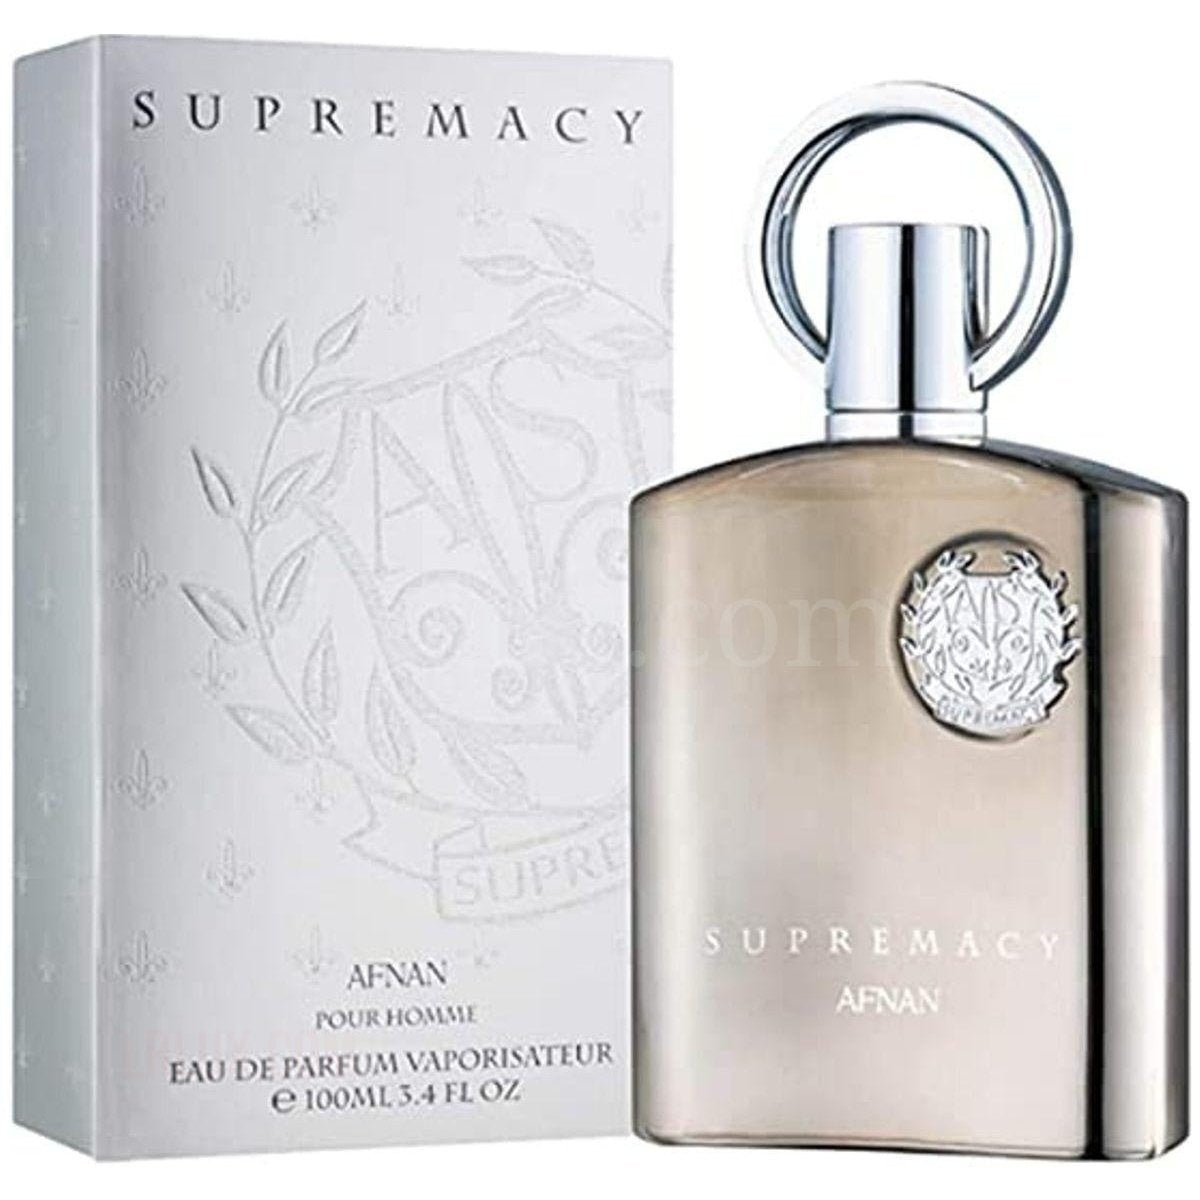 Supremacy Silver by Afnan cologne for men EDP 3.3 / 3.4 oz New in Box - Lrlux.com